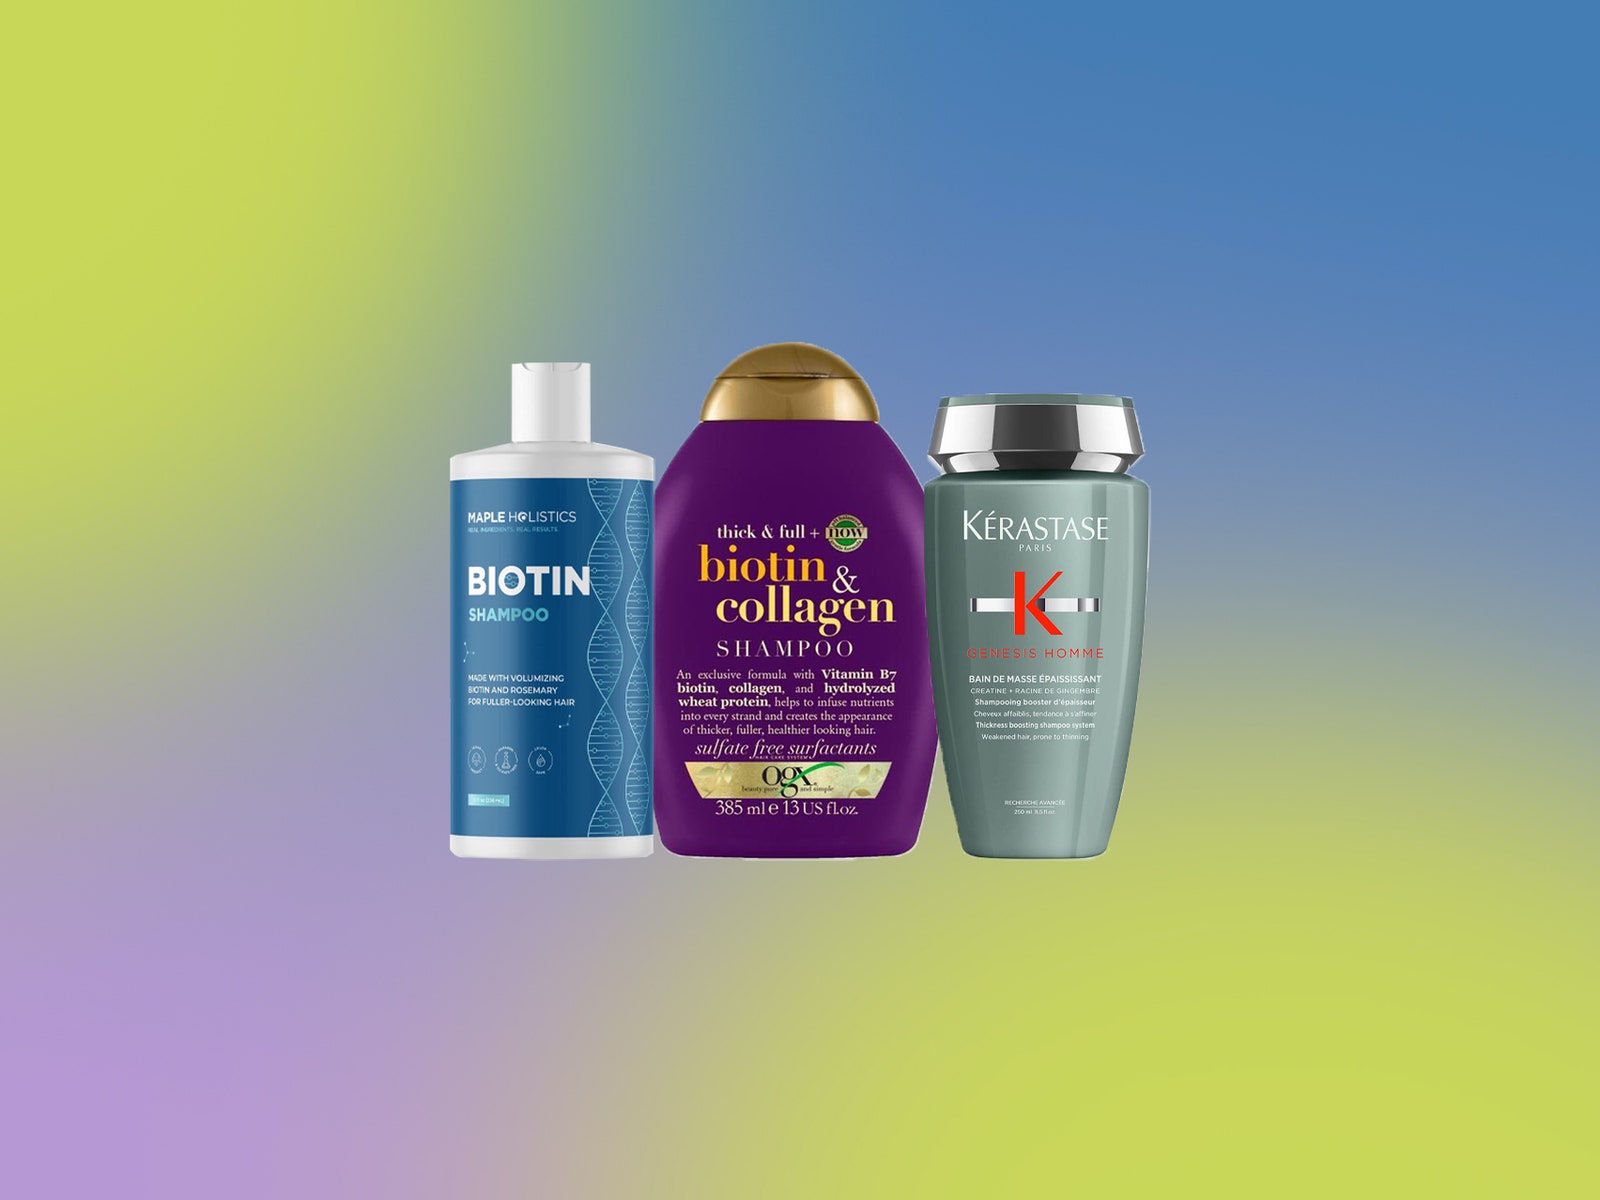 Does biotin make your hair grow longer? We ask the experts